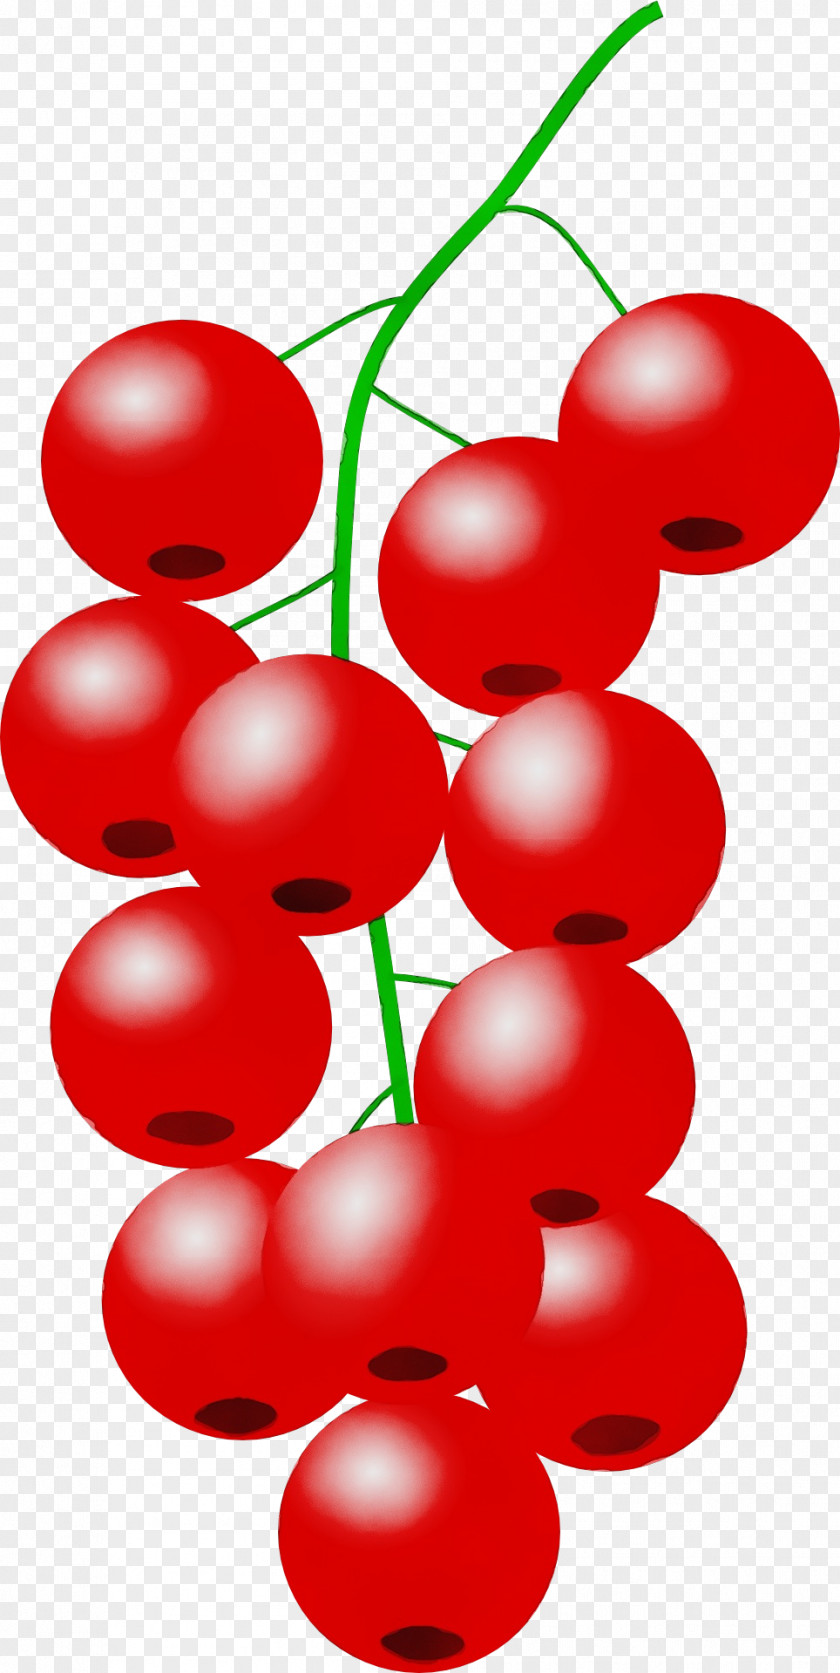 Cherry Lingonberry Red Clip Art Currant Fruit Plant PNG